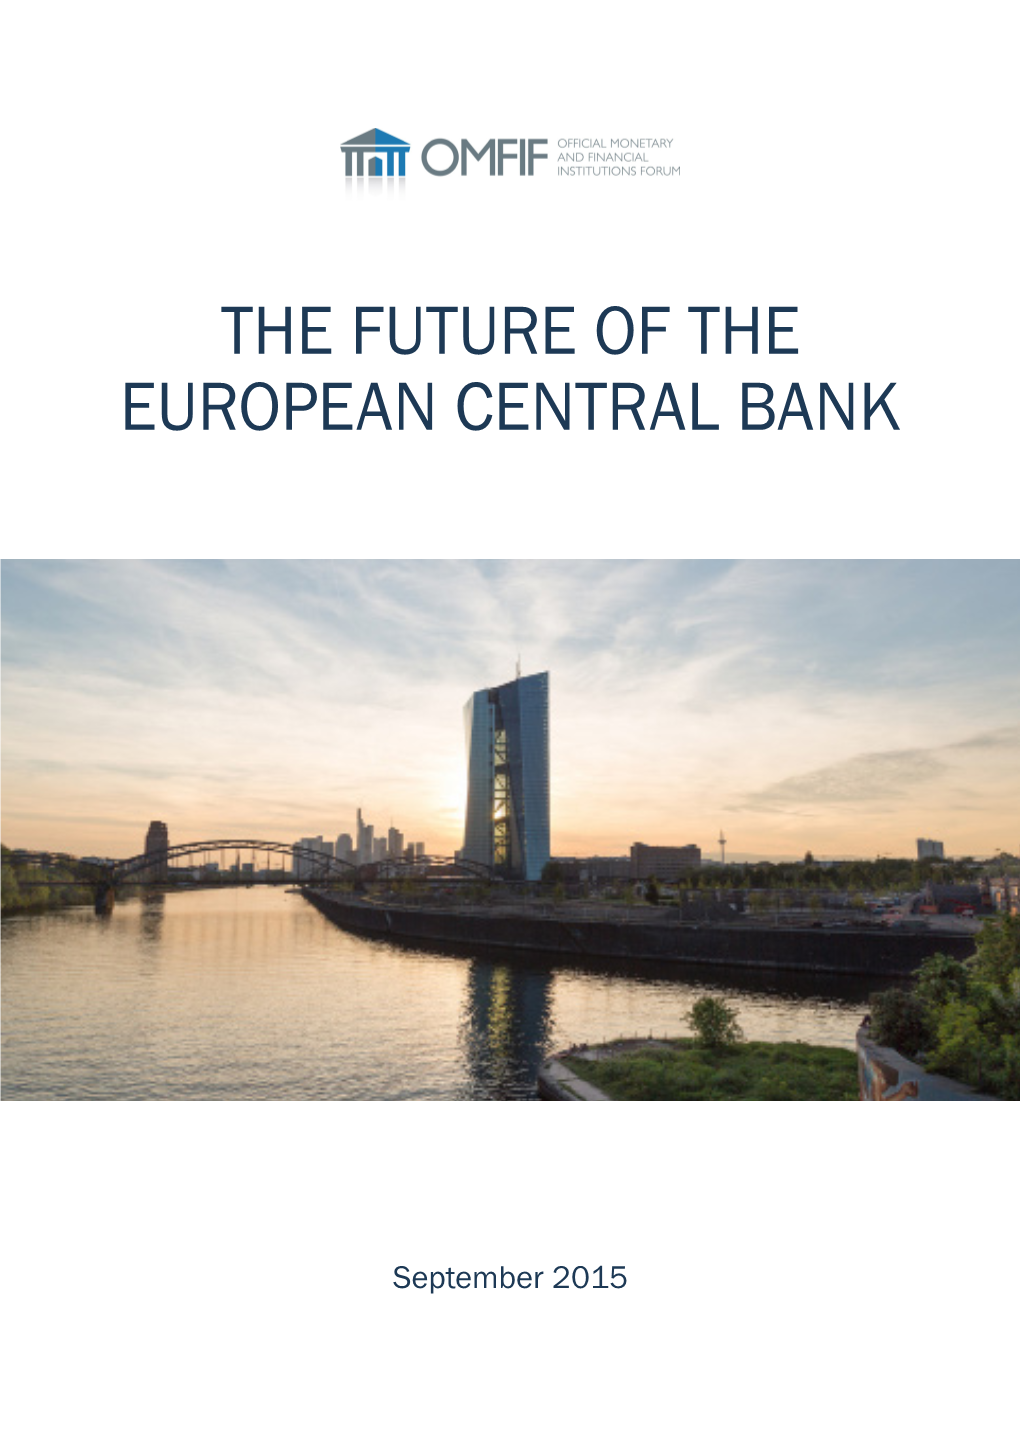 The Future of the European Central Bank